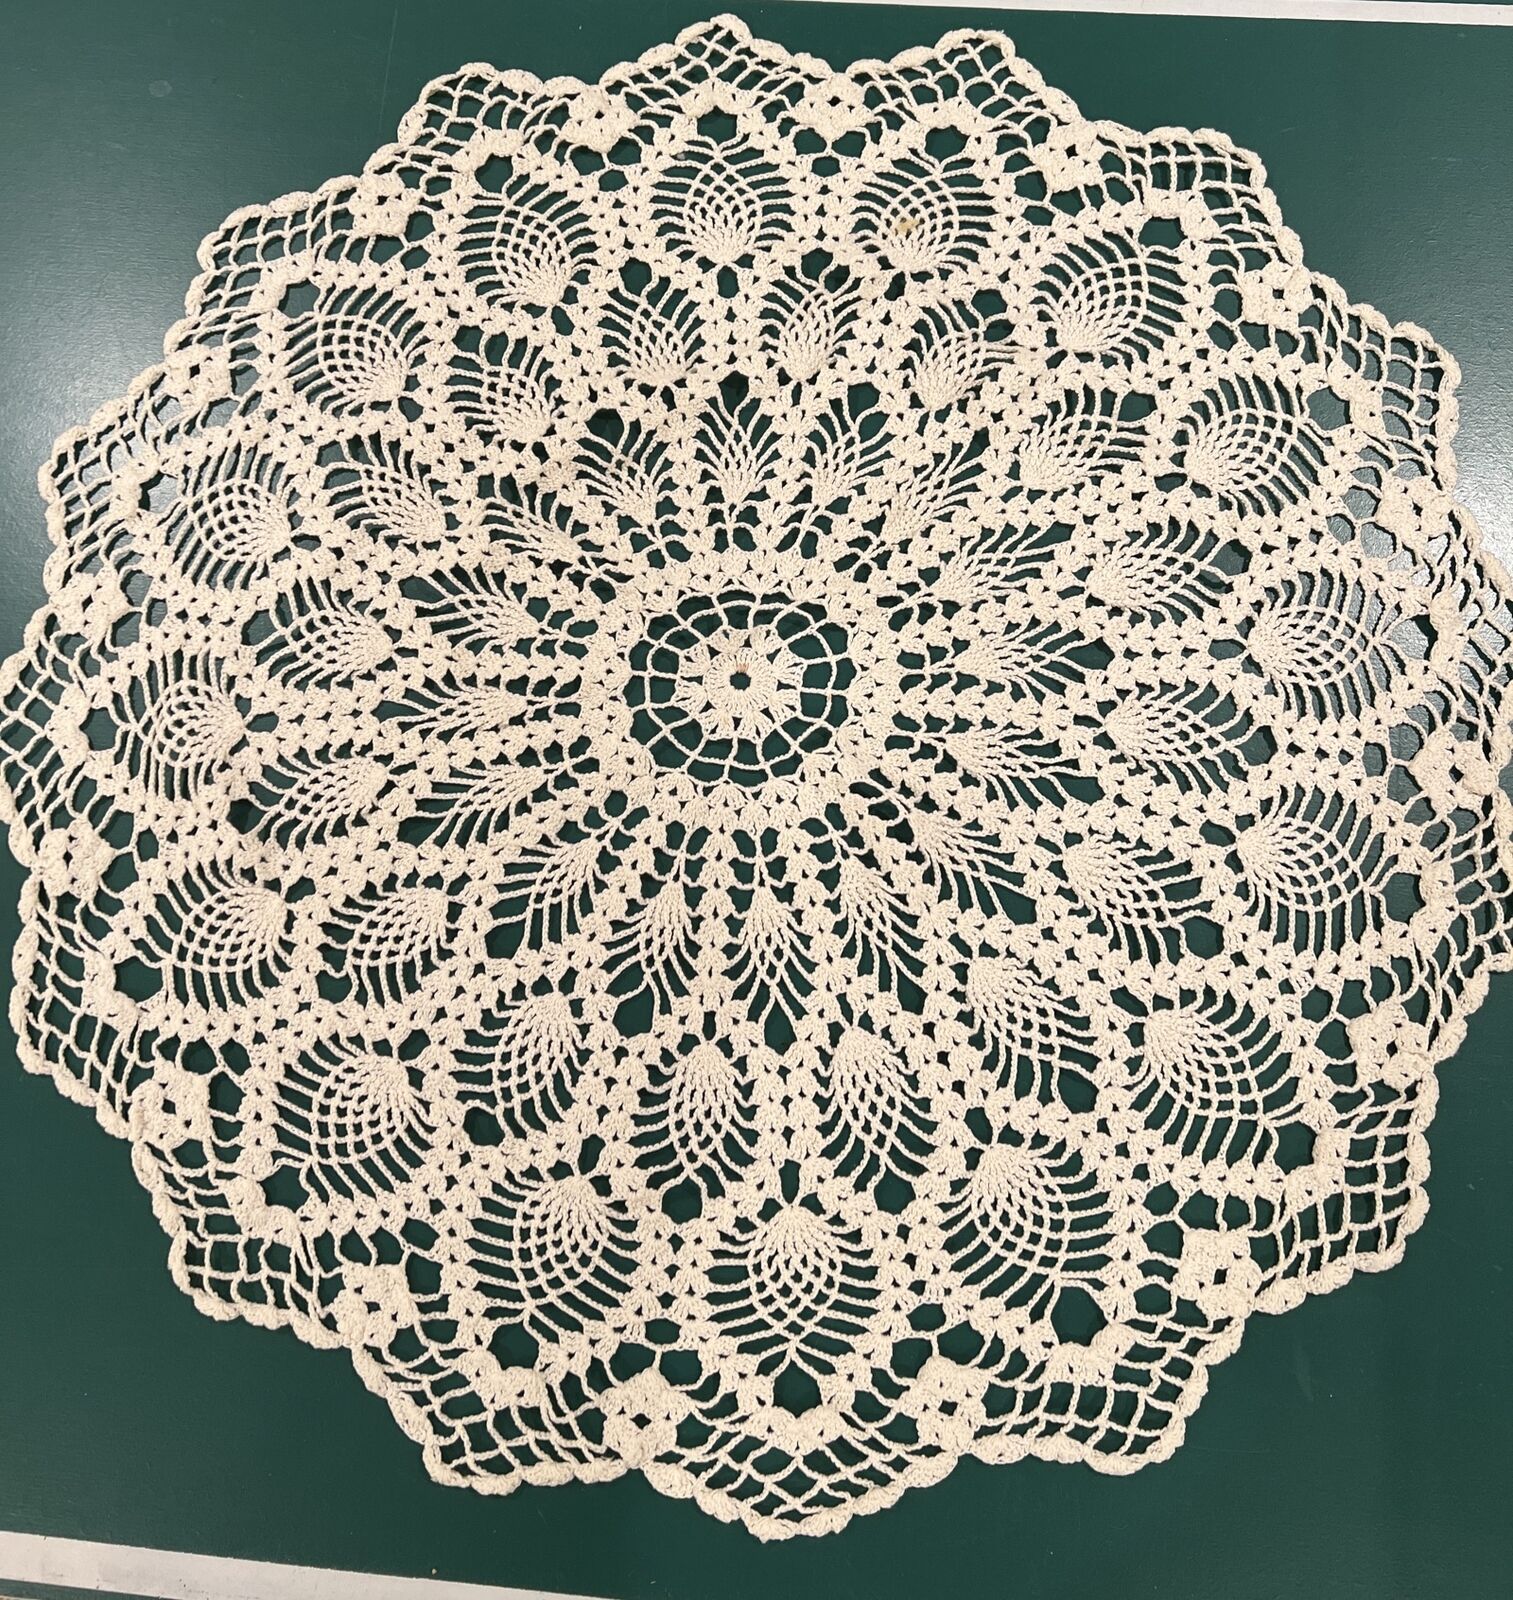 Vintage Hand Crochet Round White Dollie, Large Approximately 28” Diameter.